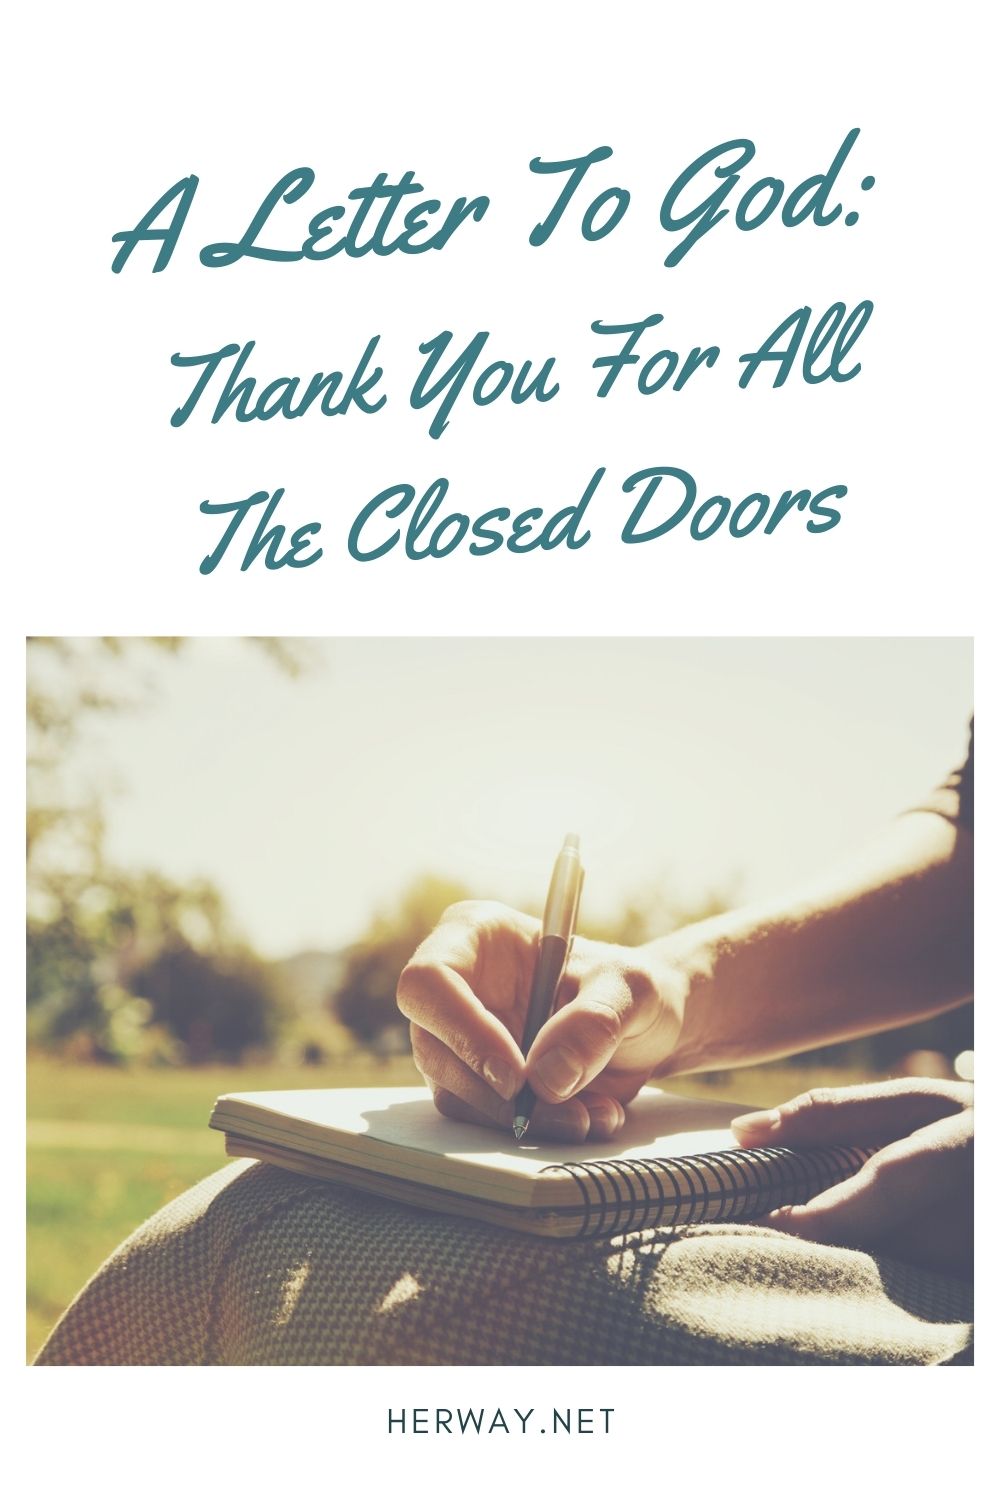 A Letter To God: Thank You For All The Closed Doors